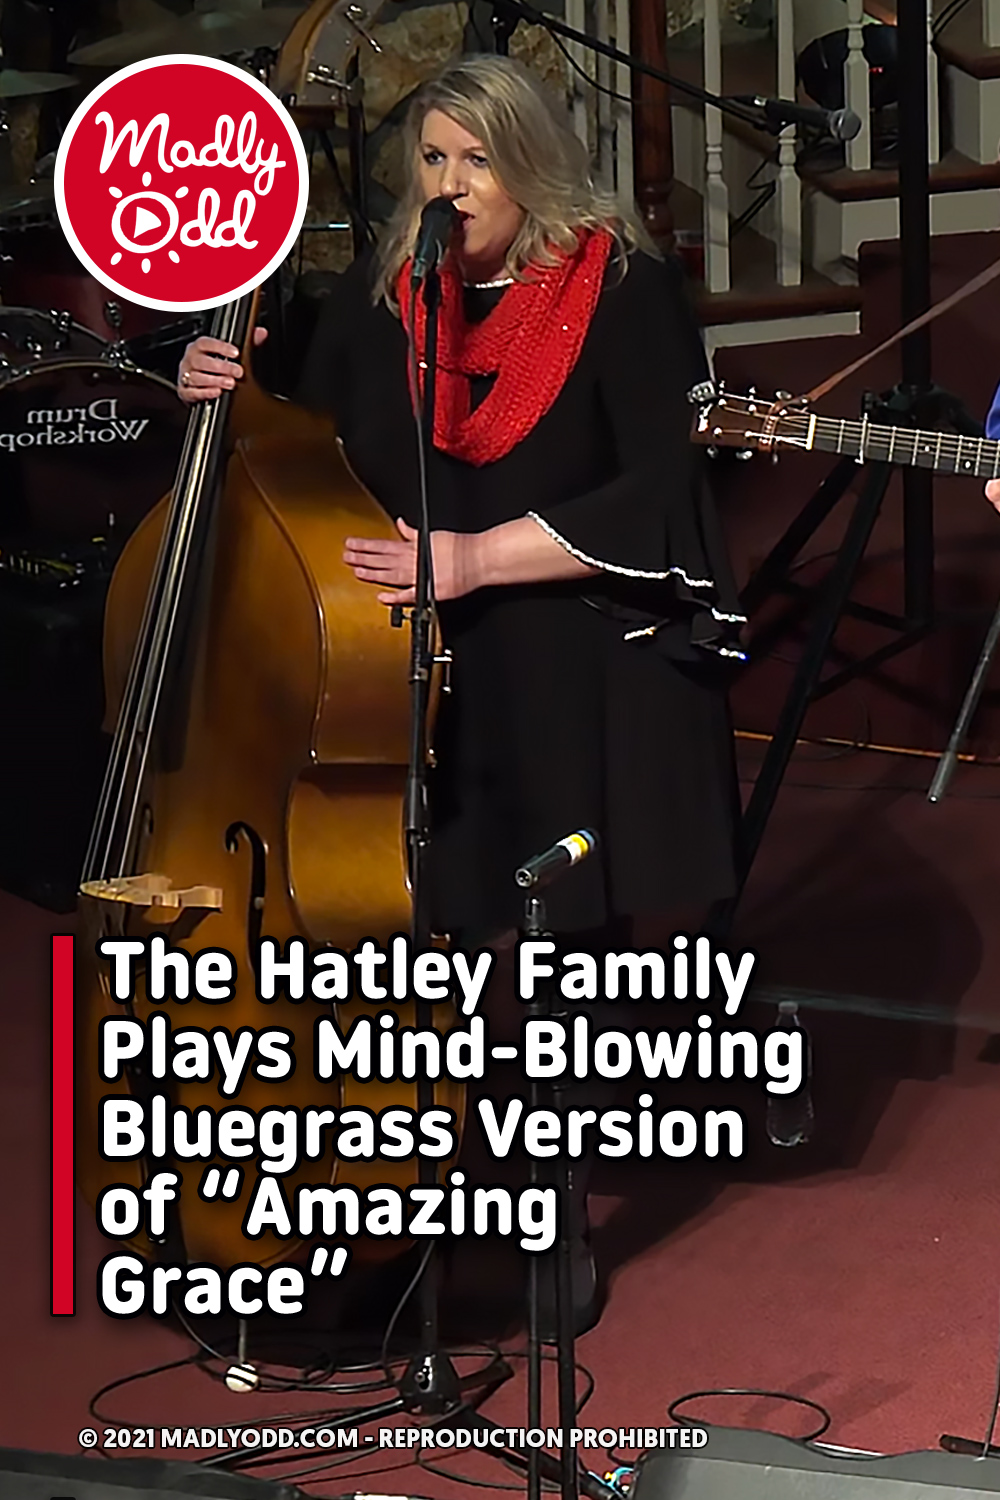 The Hatley Family Plays Mind-Blowing Bluegrass Version of “Amazing Grace”